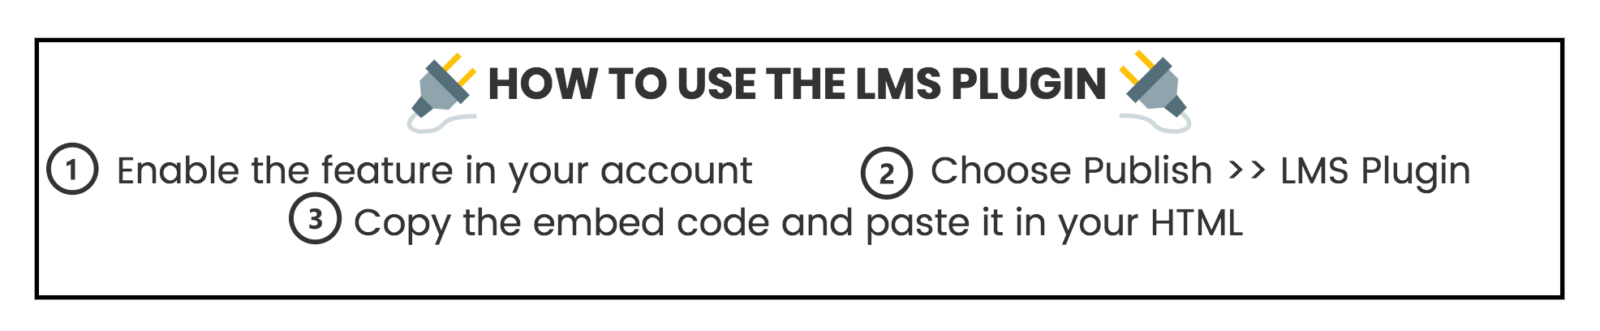 How to Use the LMS Plugin. 1. Enable the feature in your account 2. Choose publish, then LMS plugin 3. Copy the embed code and paste it in your HTML